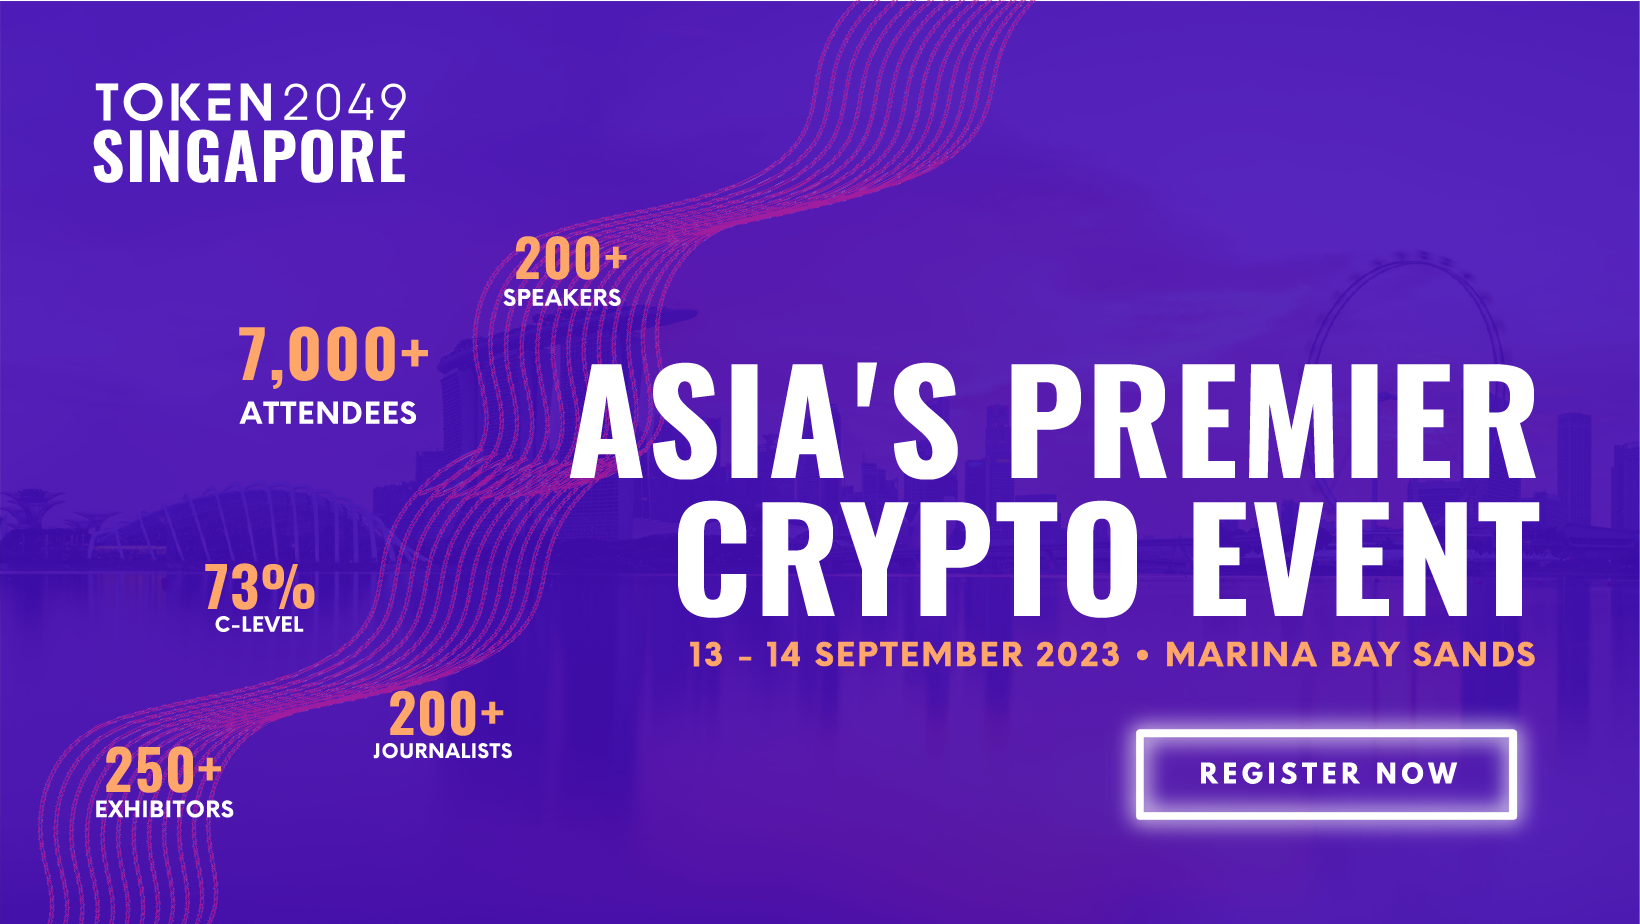 The Token 2049 conference is in Singapore in 2023